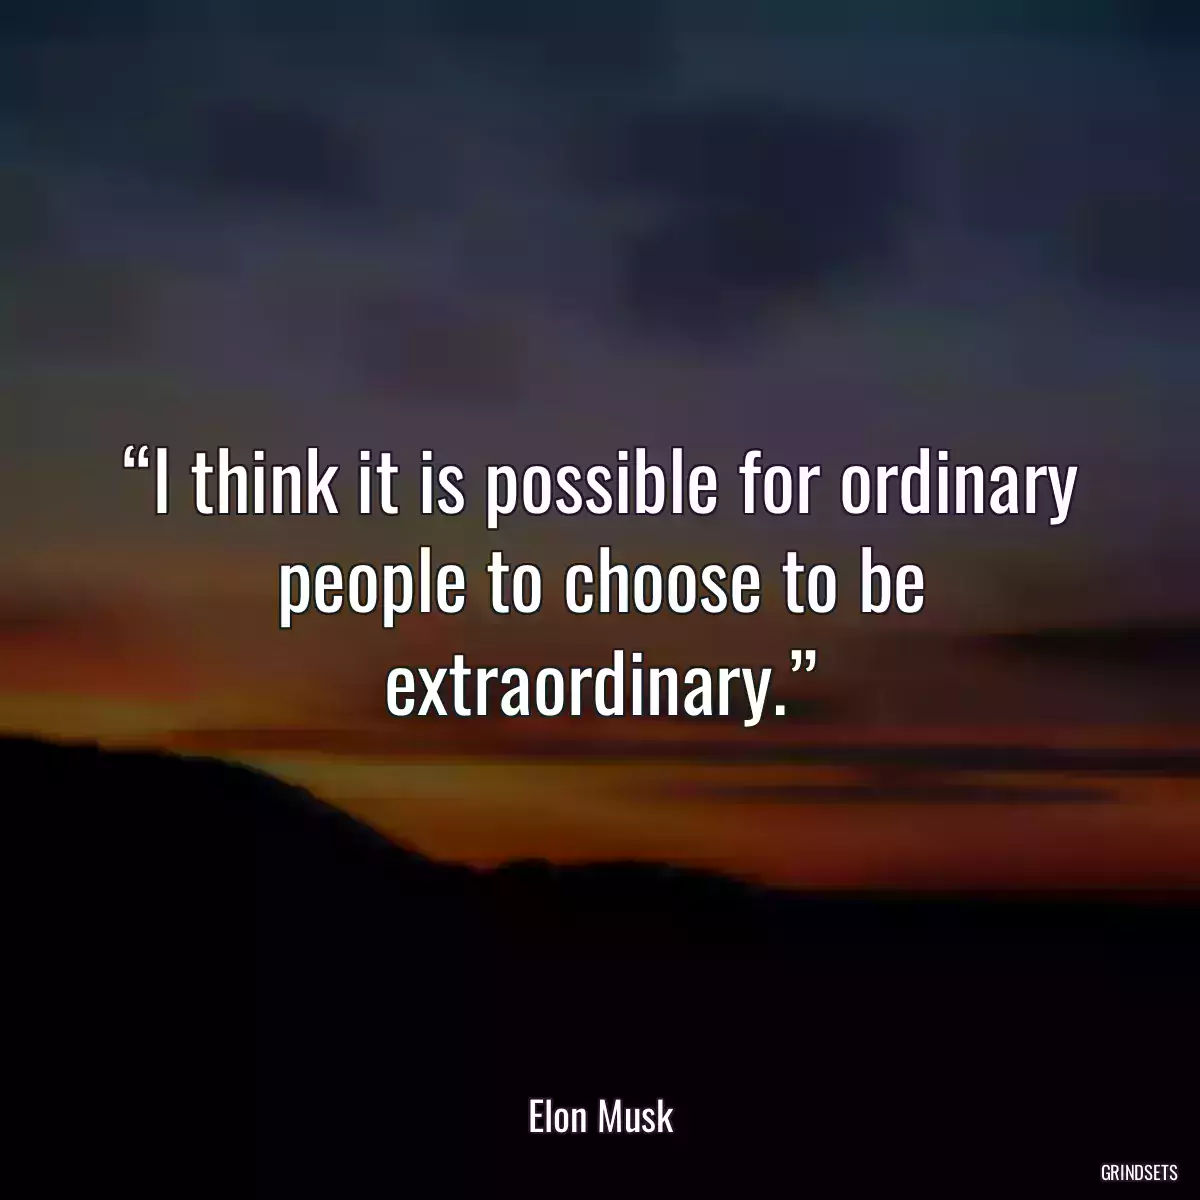 “I think it is possible for ordinary people to choose to be extraordinary.”